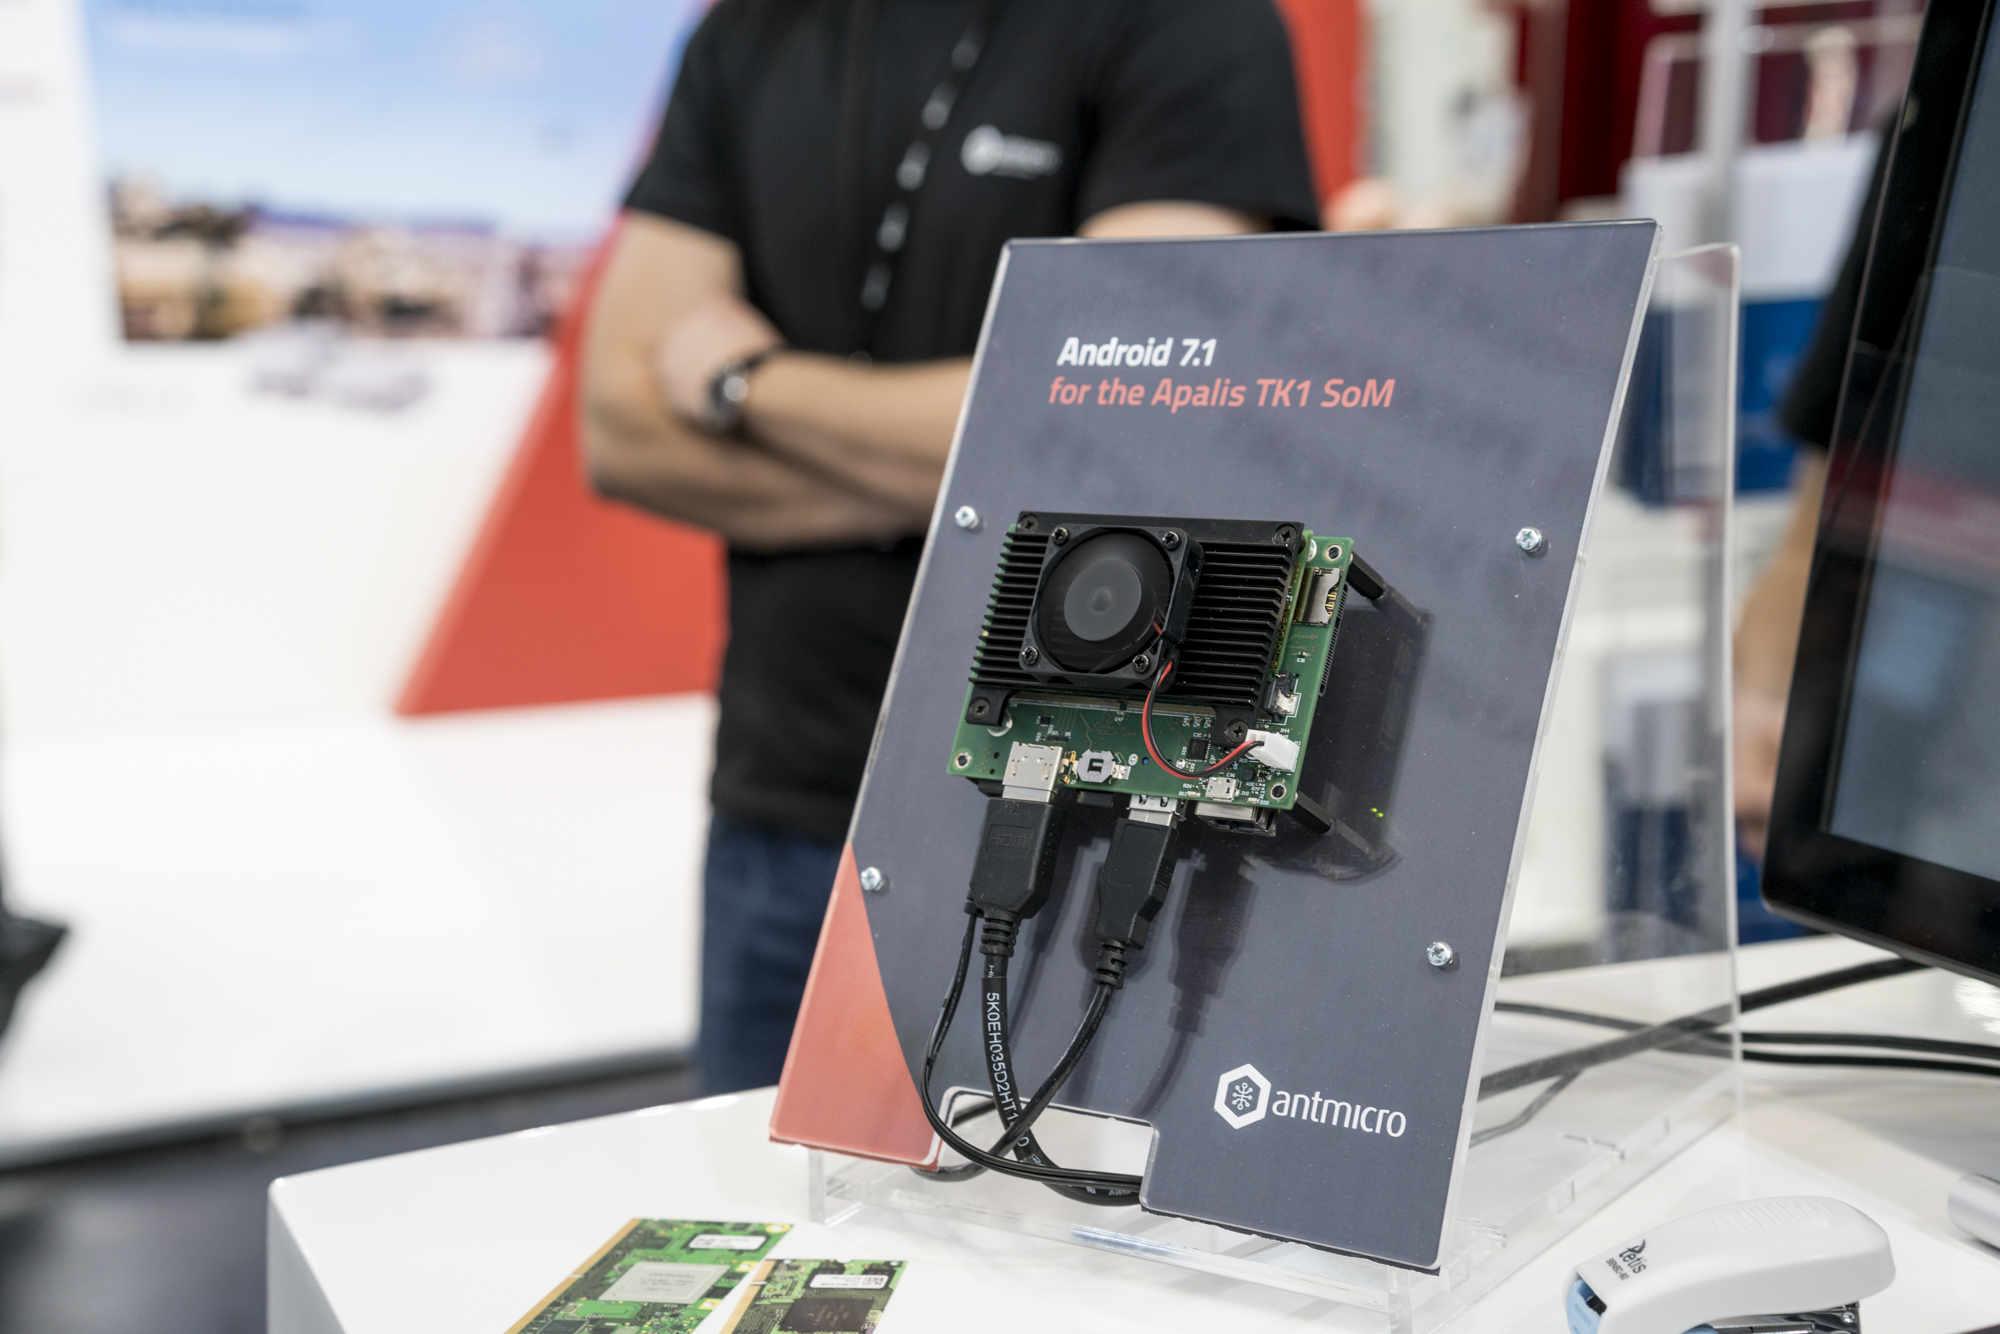 Antmicro’s Industrial Android 7.1 Nougat on Apalis TK1 at Embedded World 2017